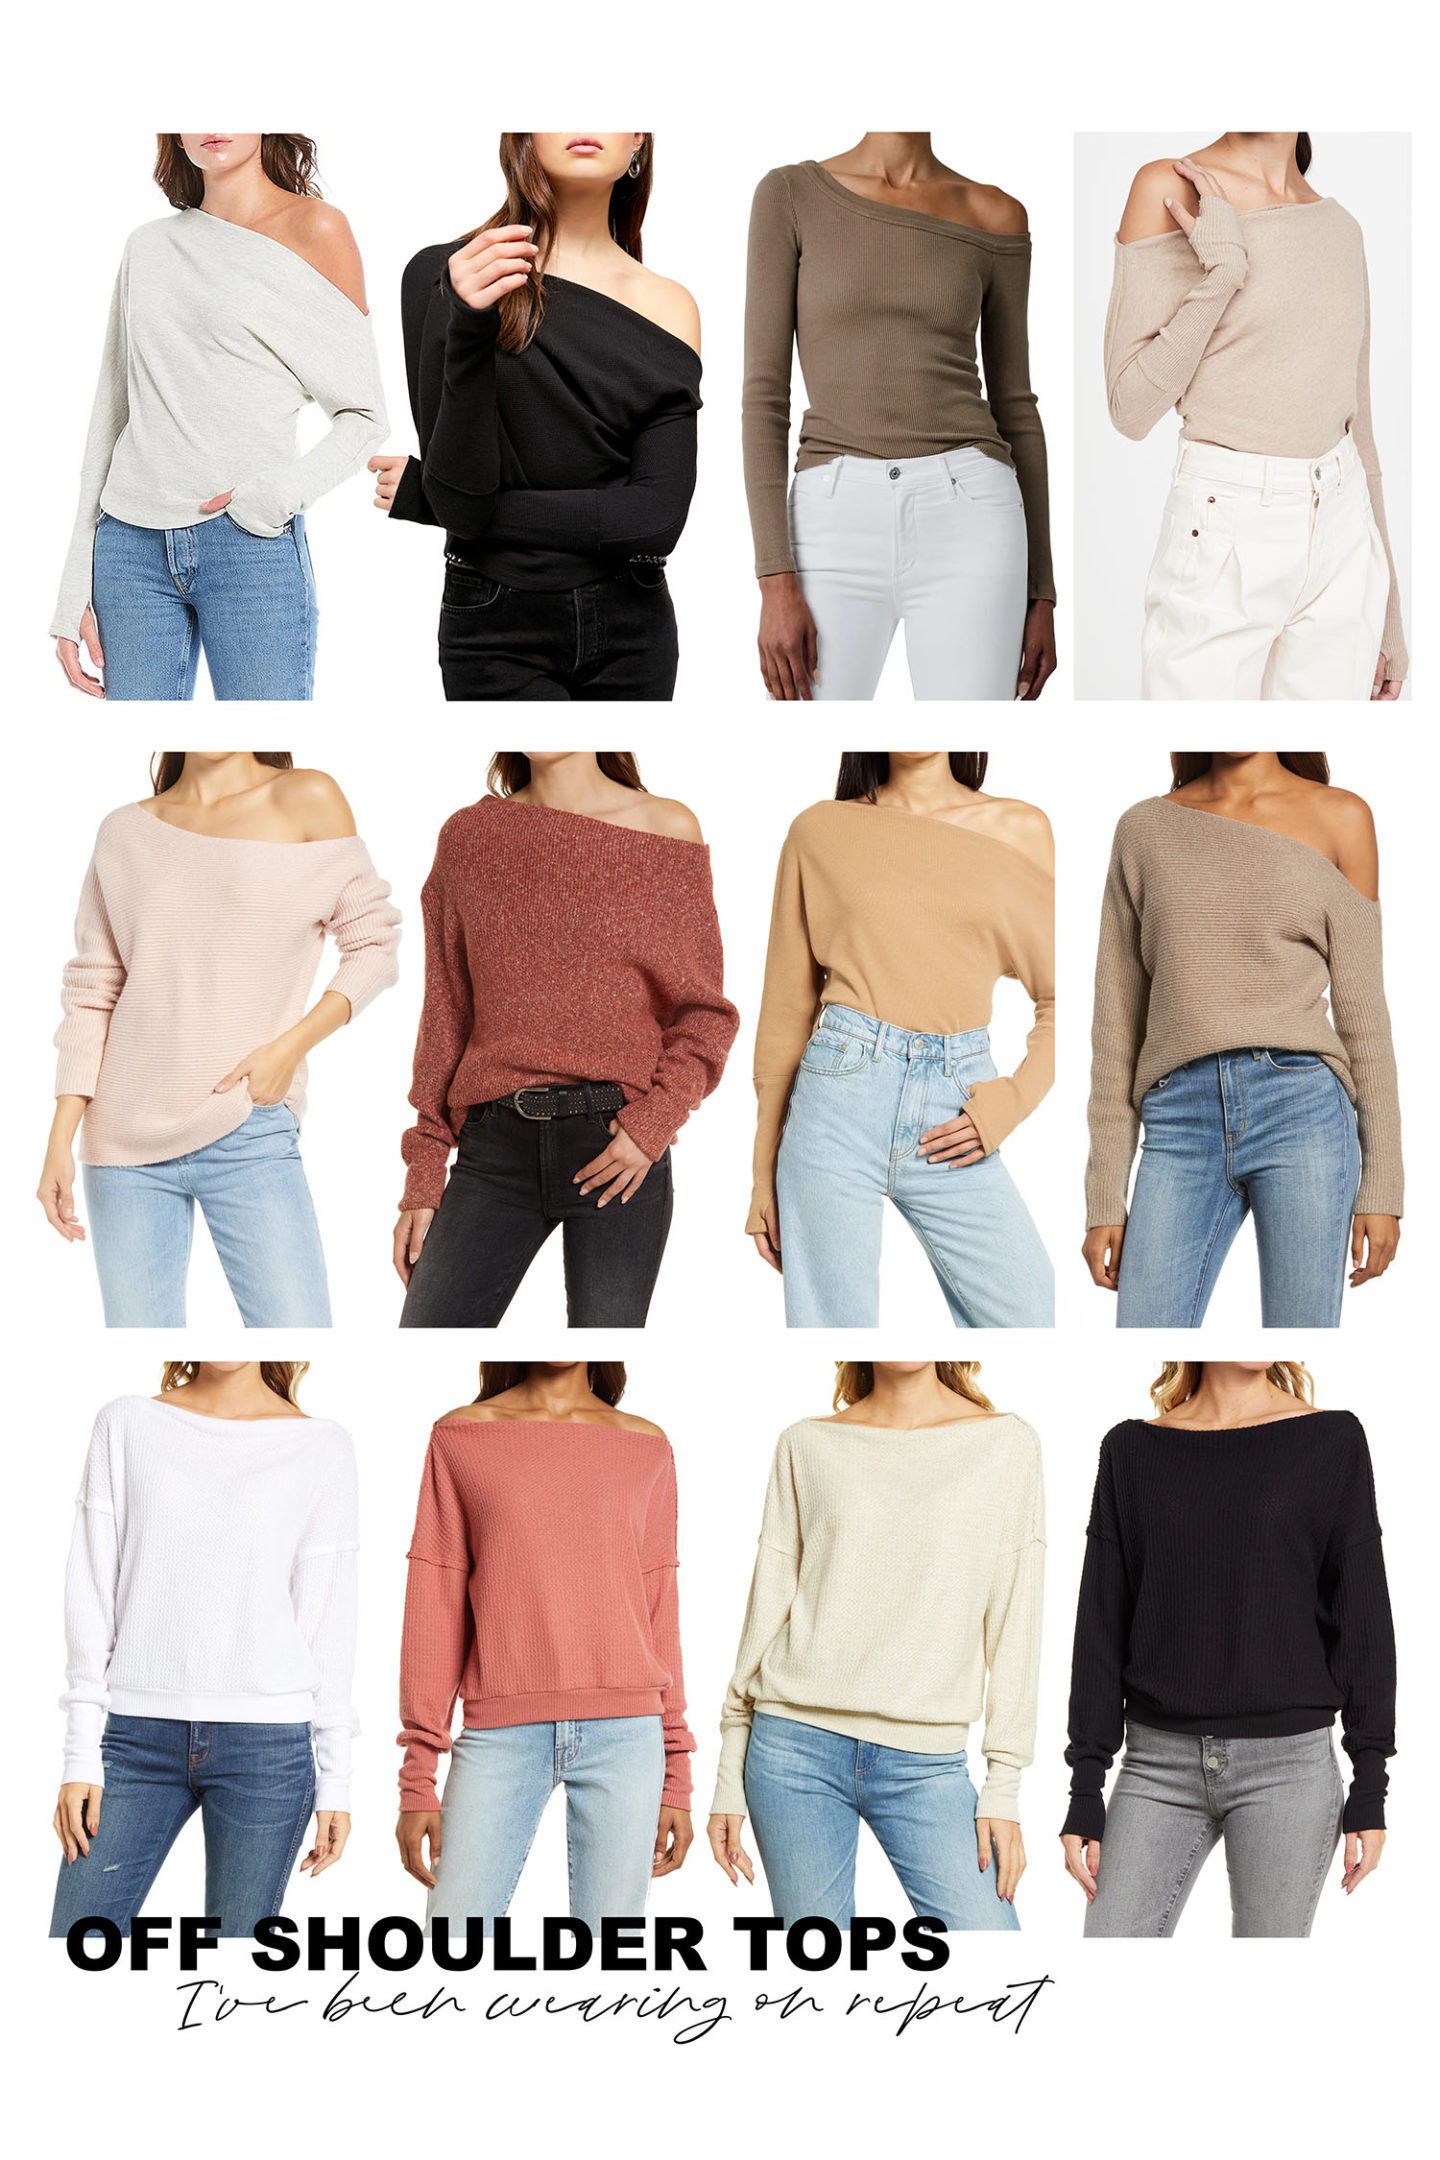 One Shoulder Tops for Thanksgiving Outfit Ideas